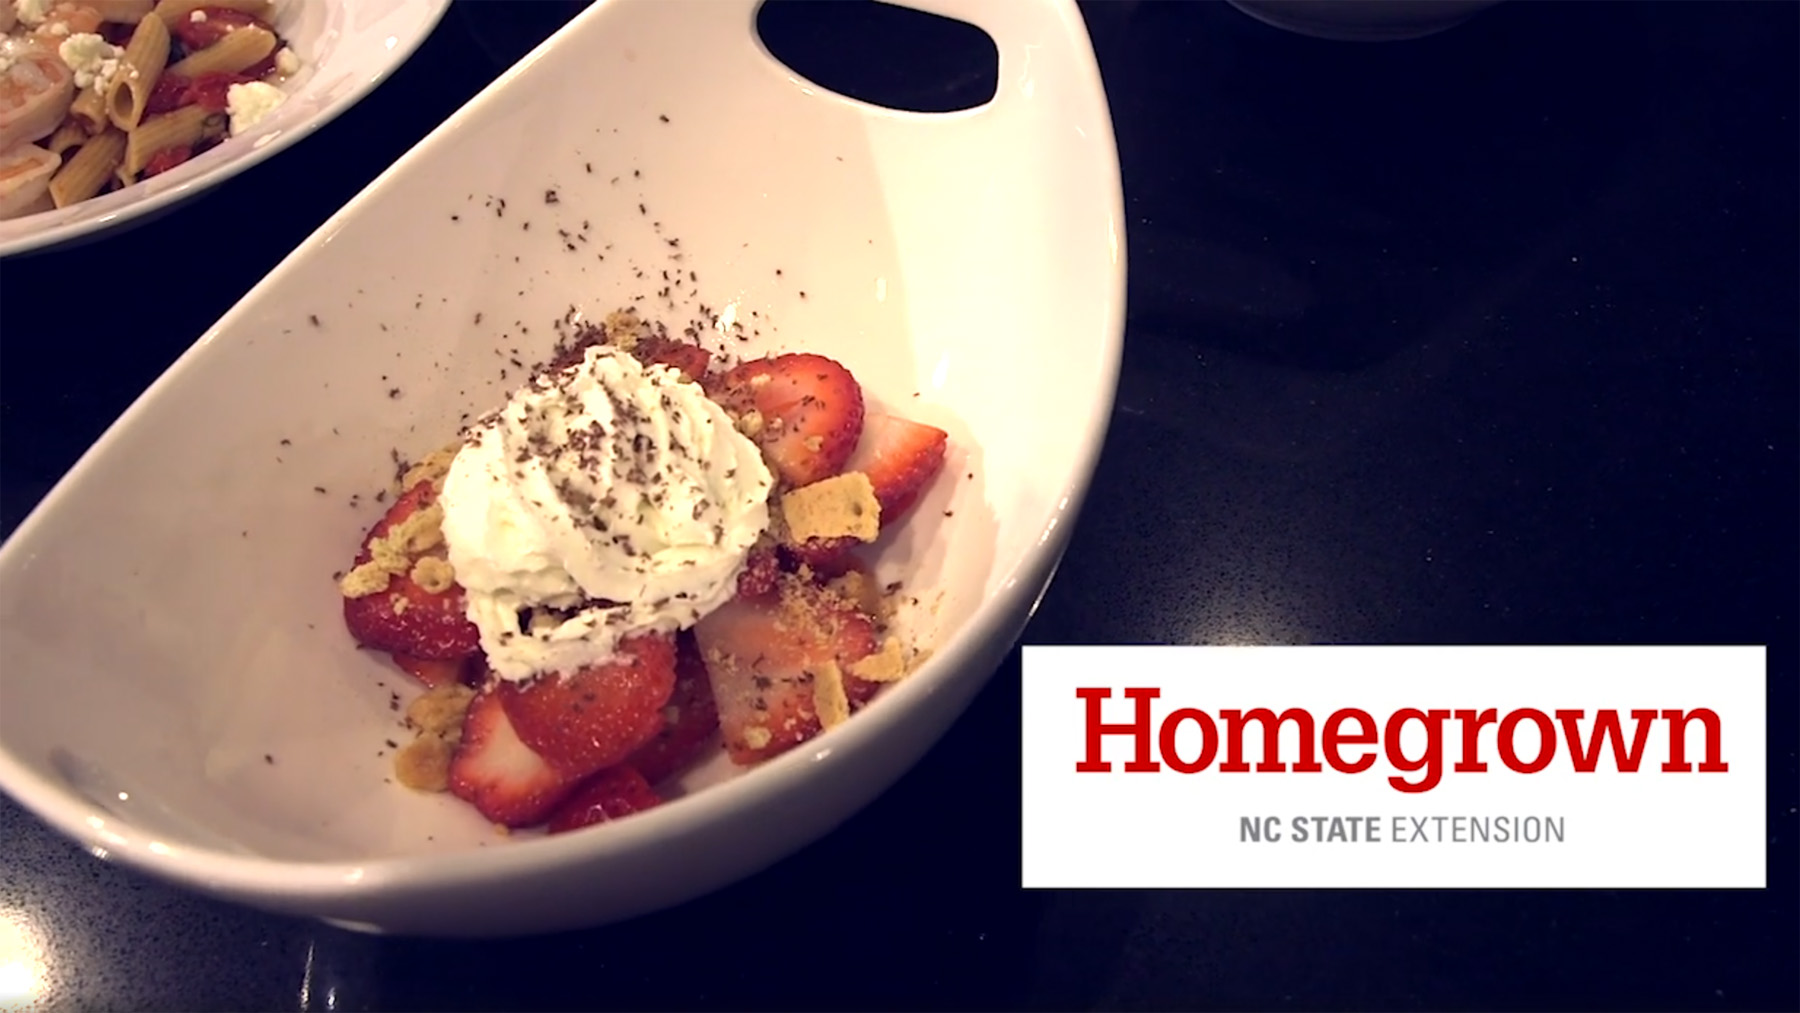 A Grand Marnier strawberry parfait is displayed in a white dish on a black counter with the Homegrown by NC State Extension logo beside it